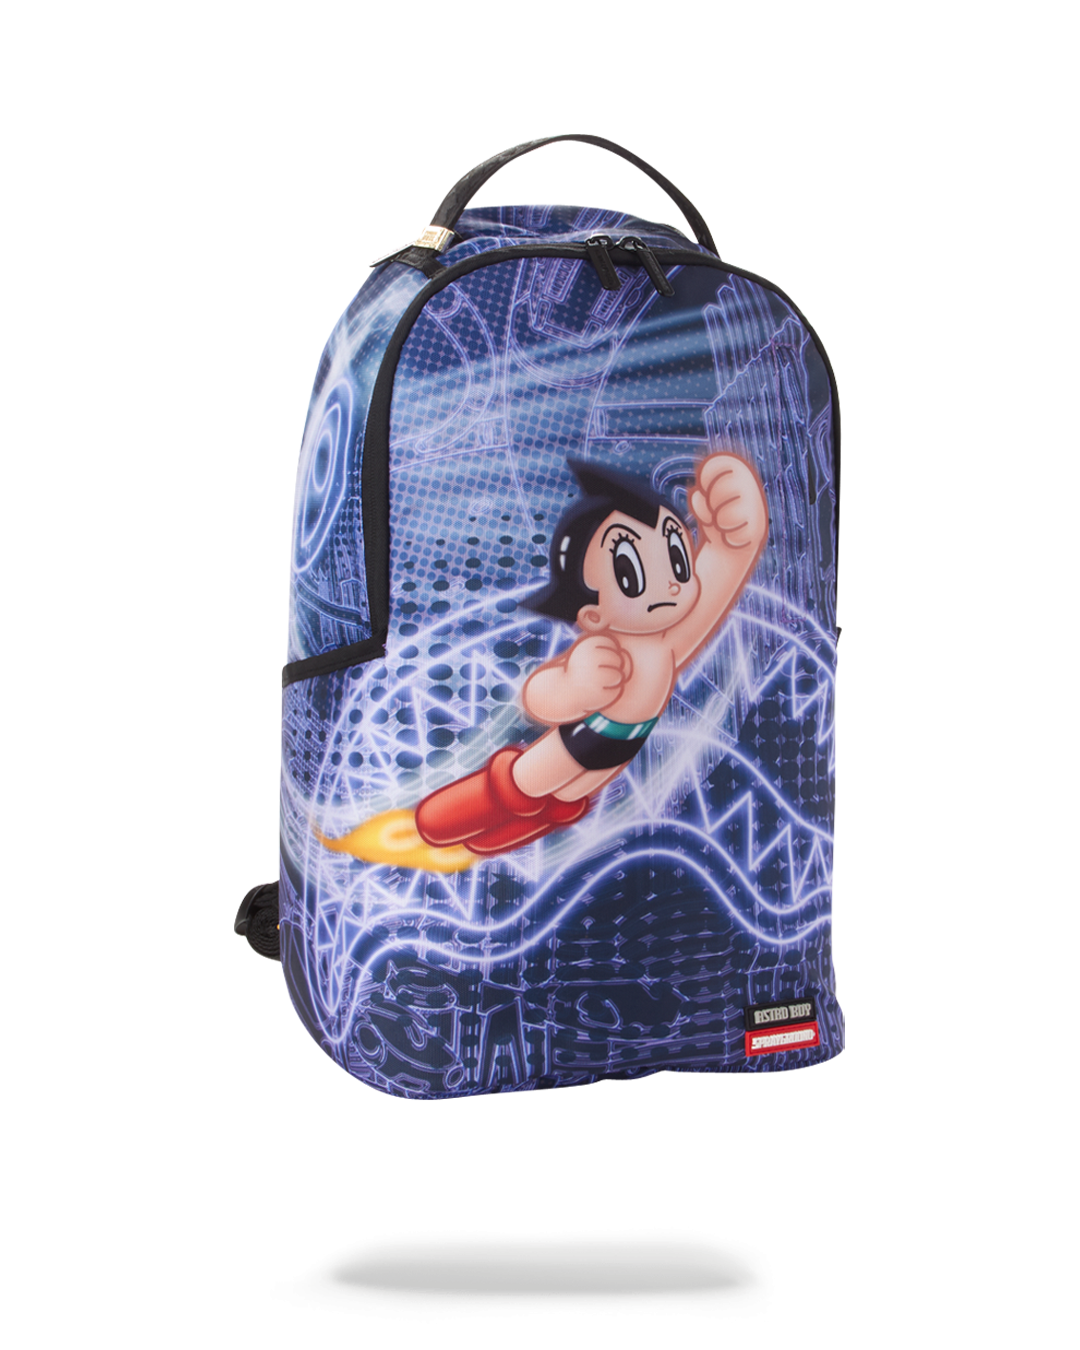 SPRAYGROUND® BACKPACK ASTRO BOY: MADE READY BACKPACK